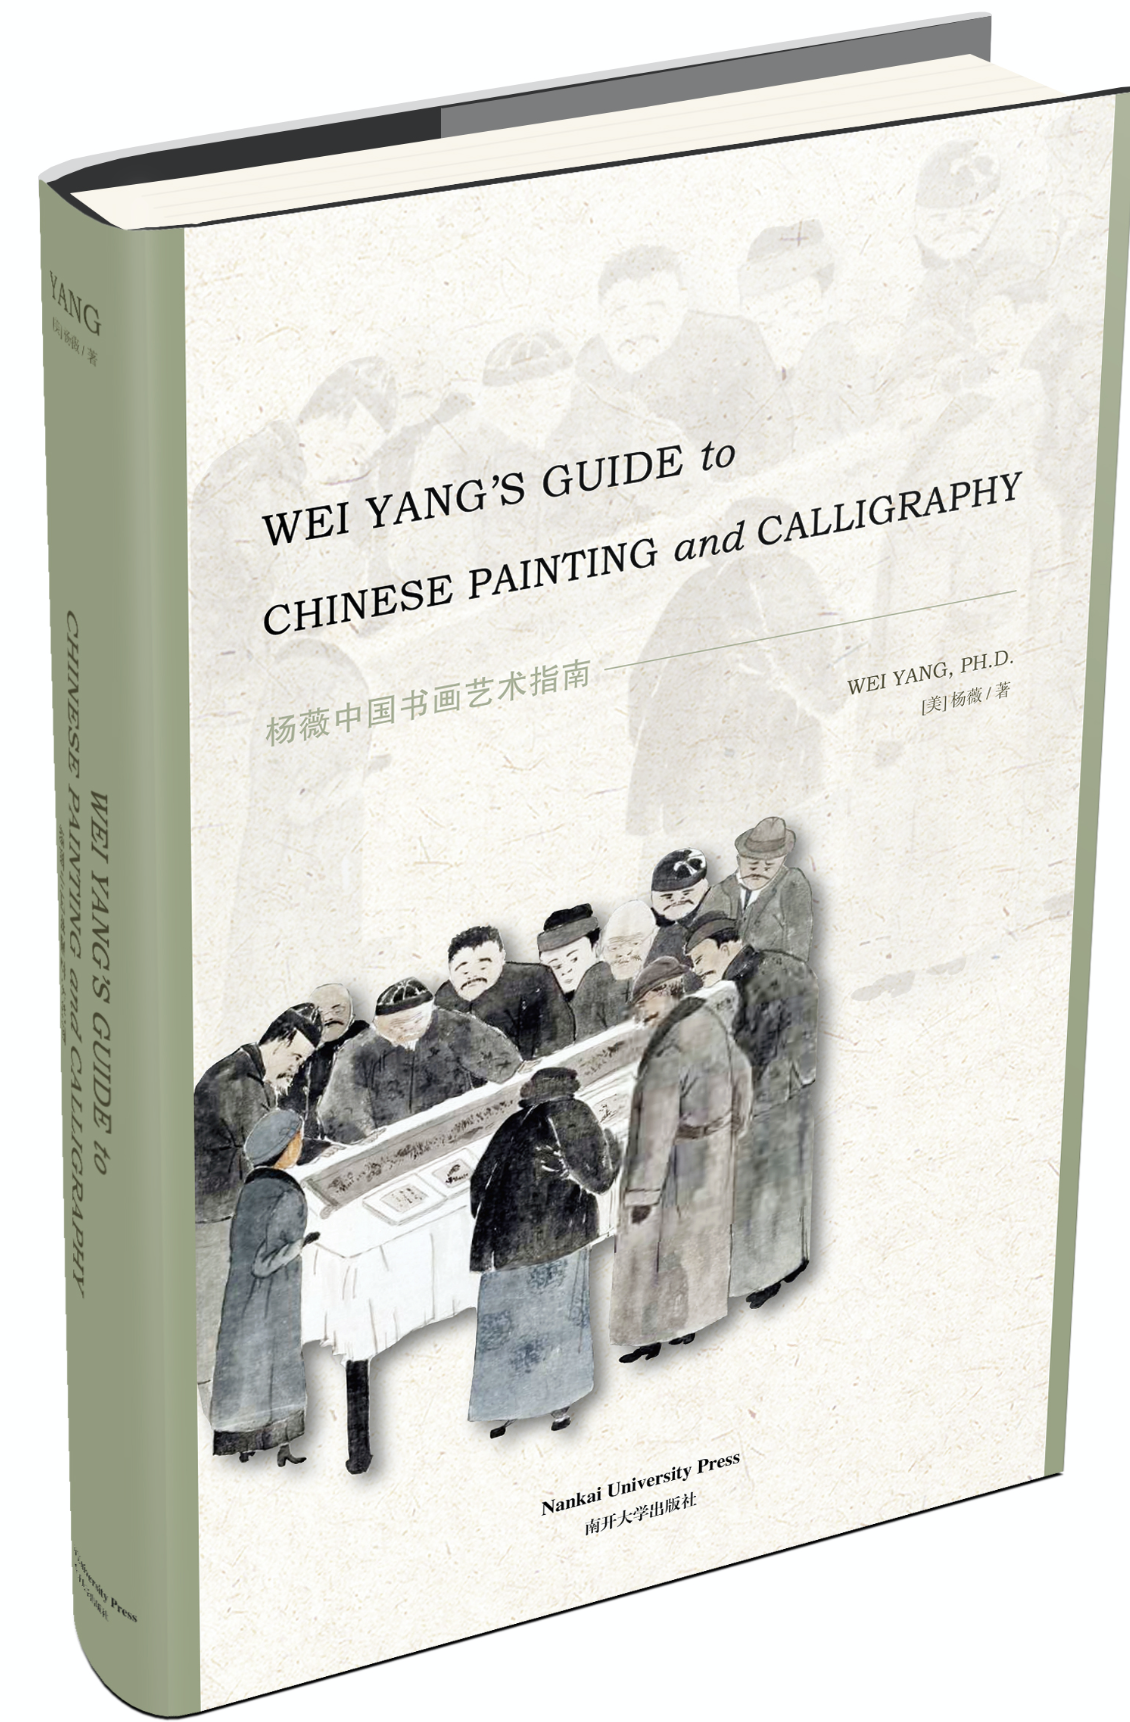 Wei Yang's Guide to Chinese Painting and Calligraphy